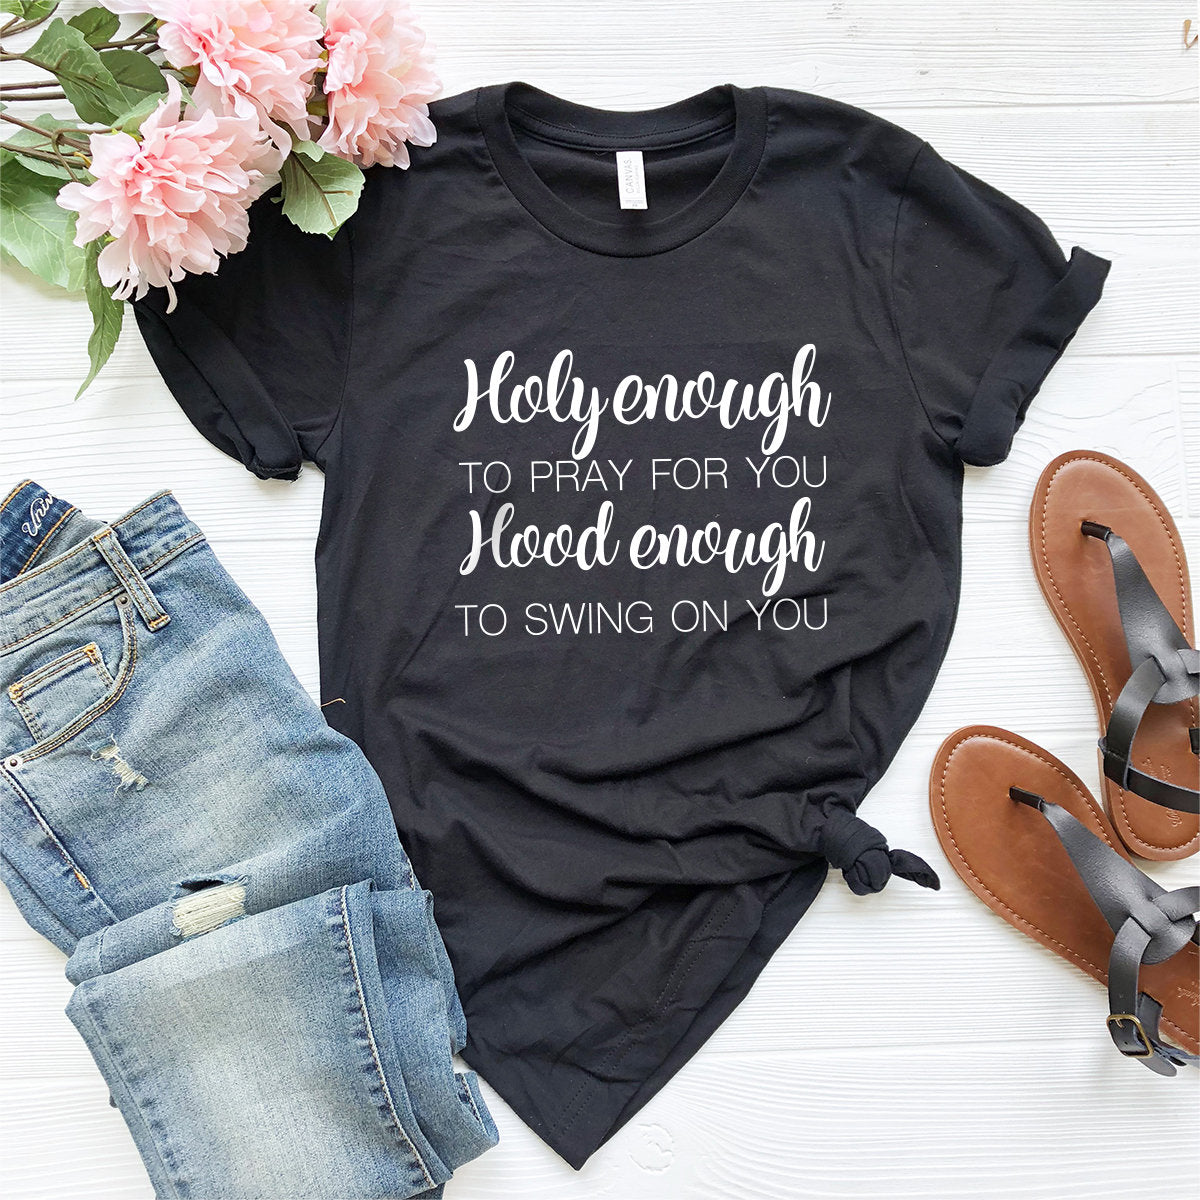 Holy Enough To Pray For You Hood Enough To Swing On You Shirt,Holy Enough To Pray Shirt,Mom Shirt - Fastdeliverytees.com